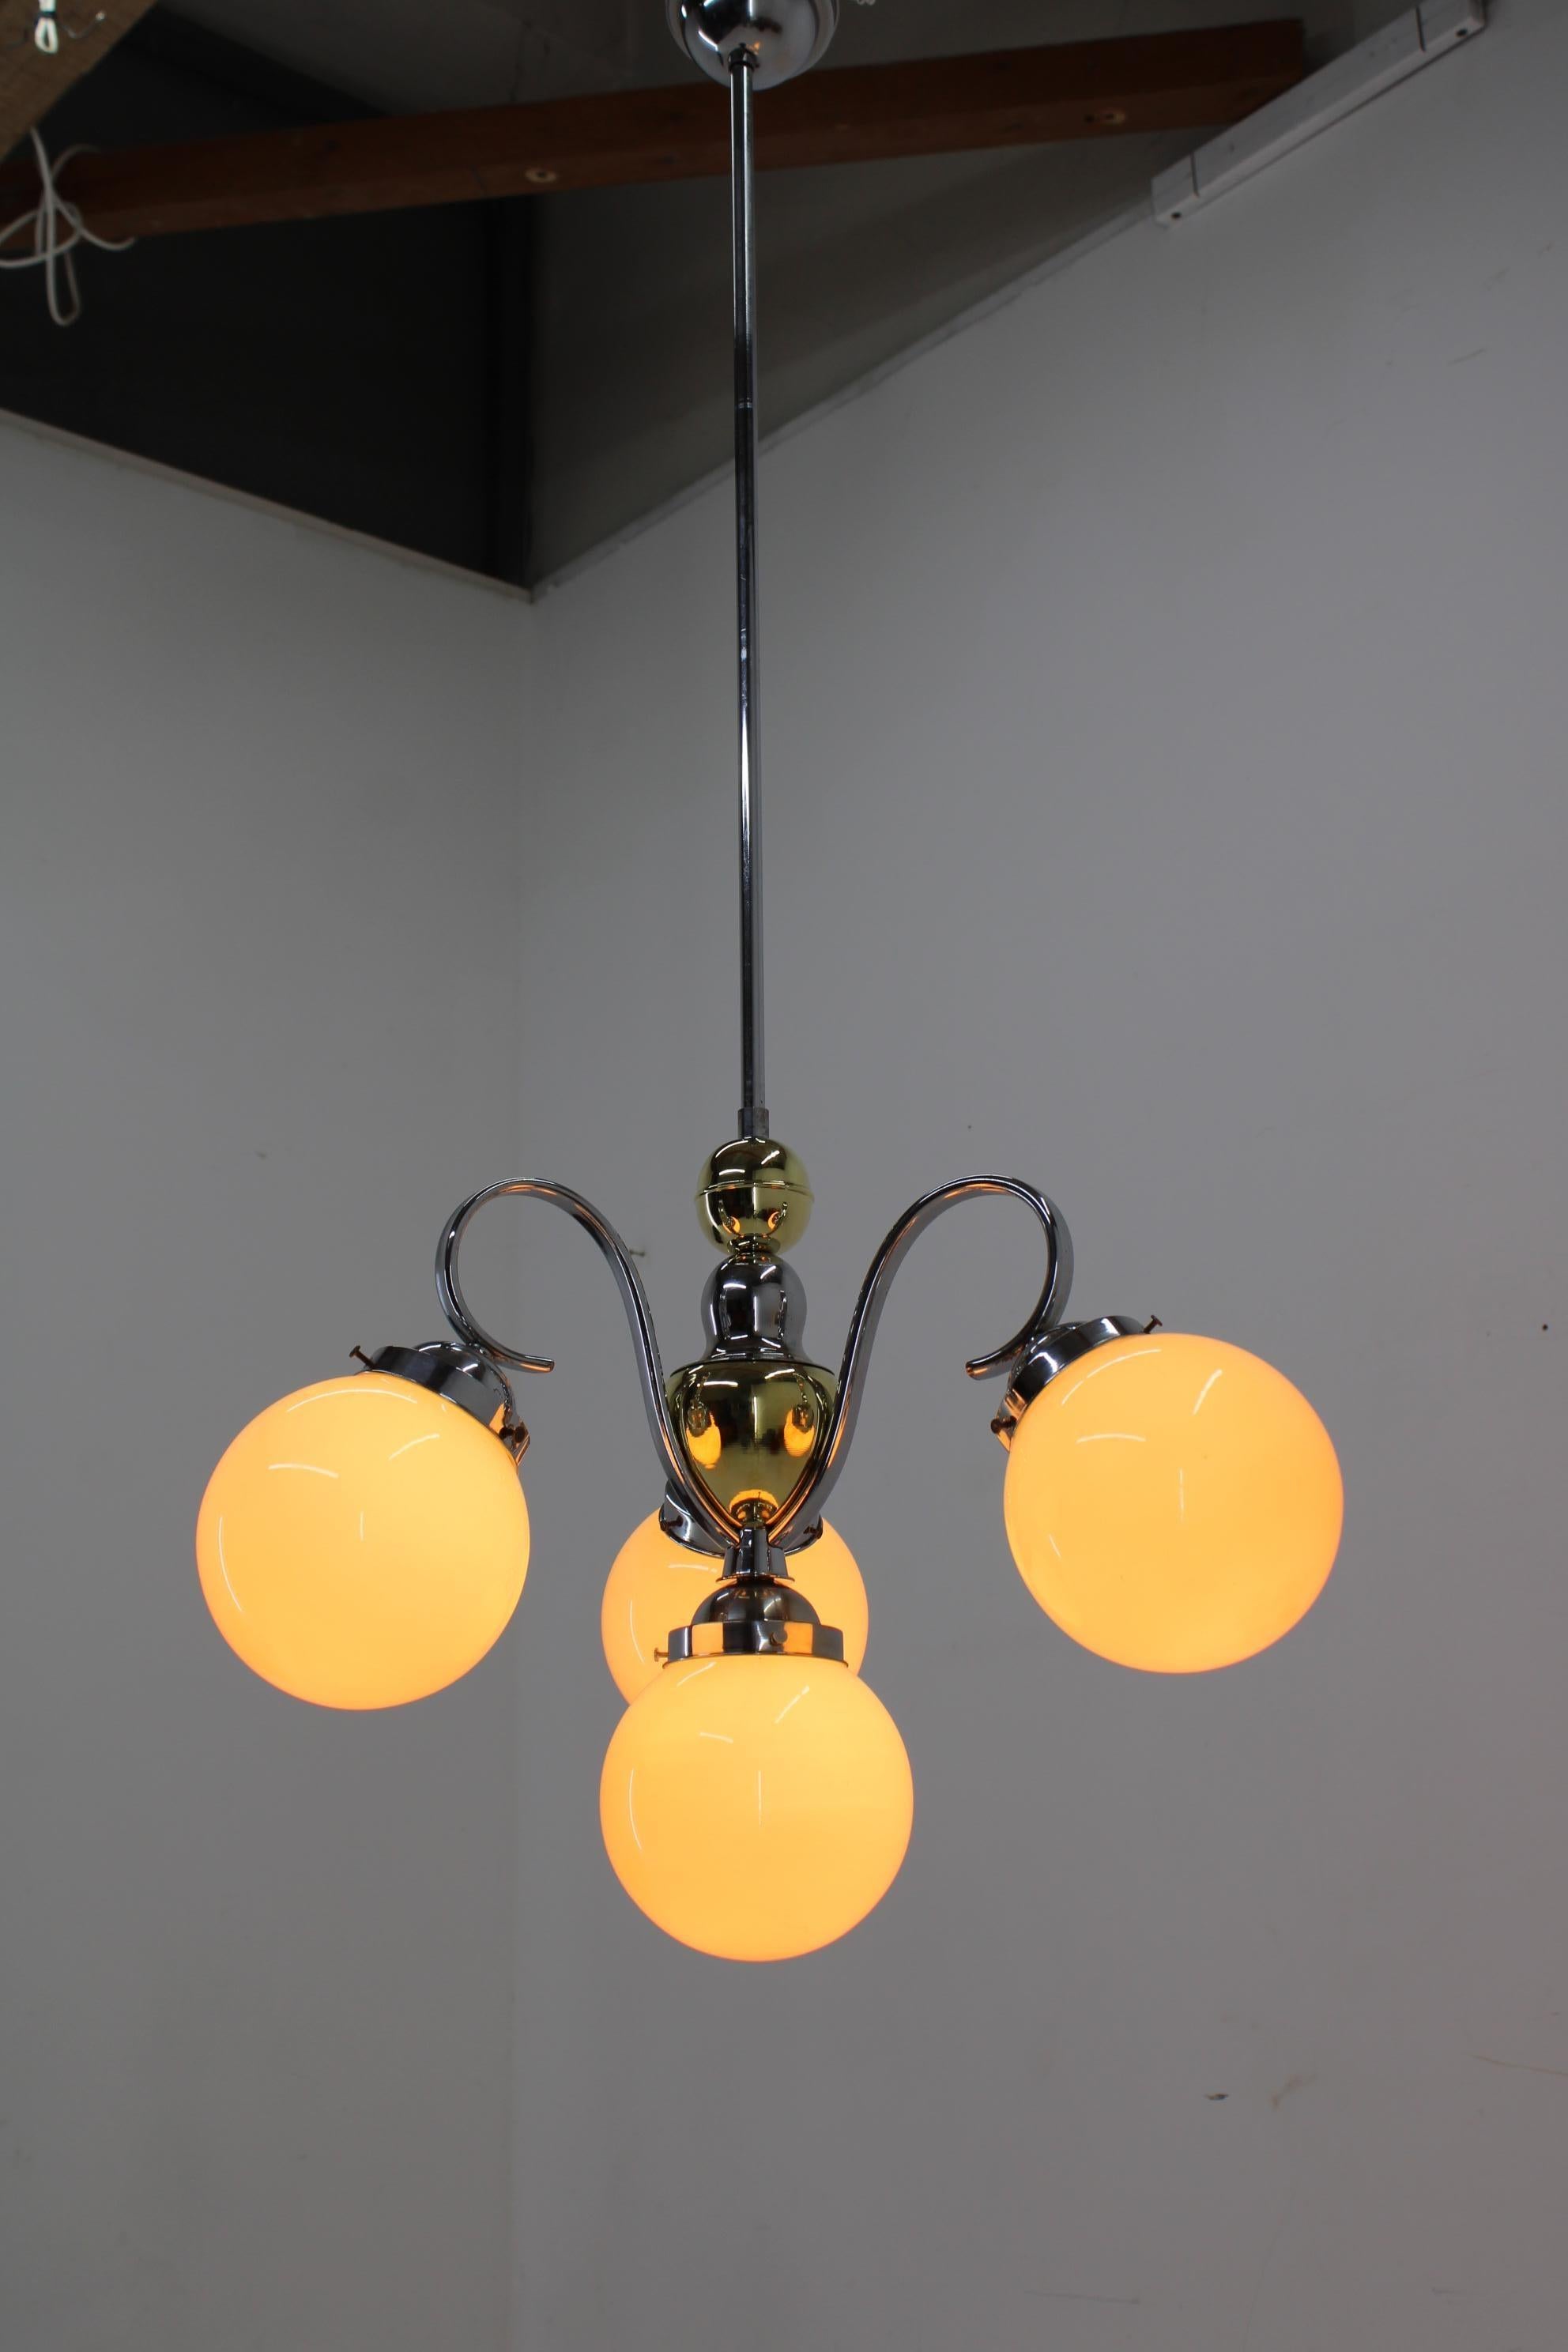 Beautiful Art Deco chandelier made in 1930s in Czechoslovakia. 
Champagne color glass shades.
Restored: cleaned, polished, rewired - two separate circuits: 1+3x40W, E25-E27 bulbs
US wiring compatible